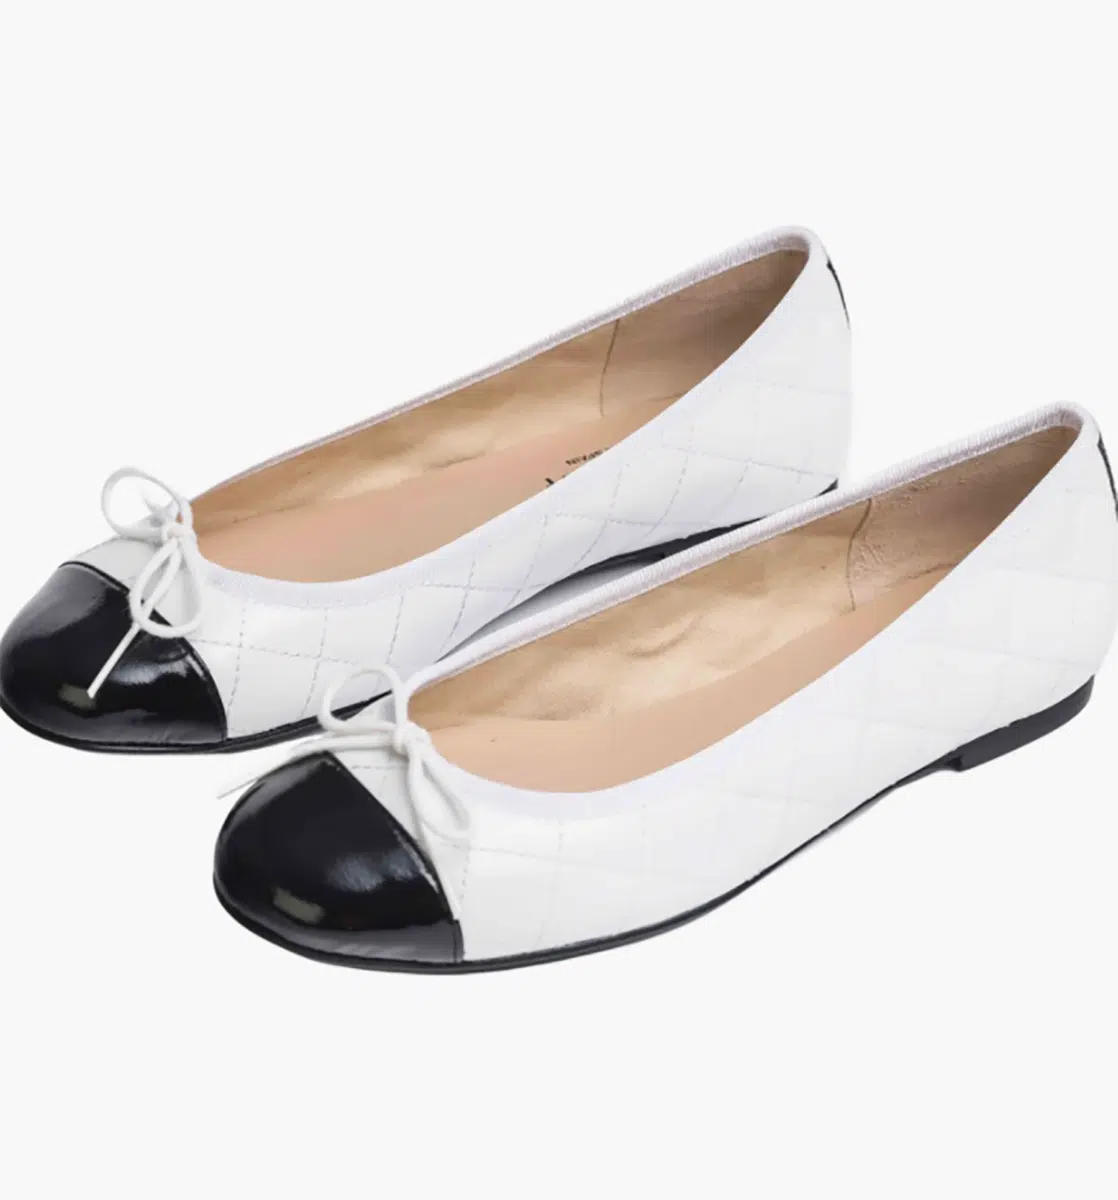 Chic Chanel flats dupe picks, by fashion blogger What The Fab